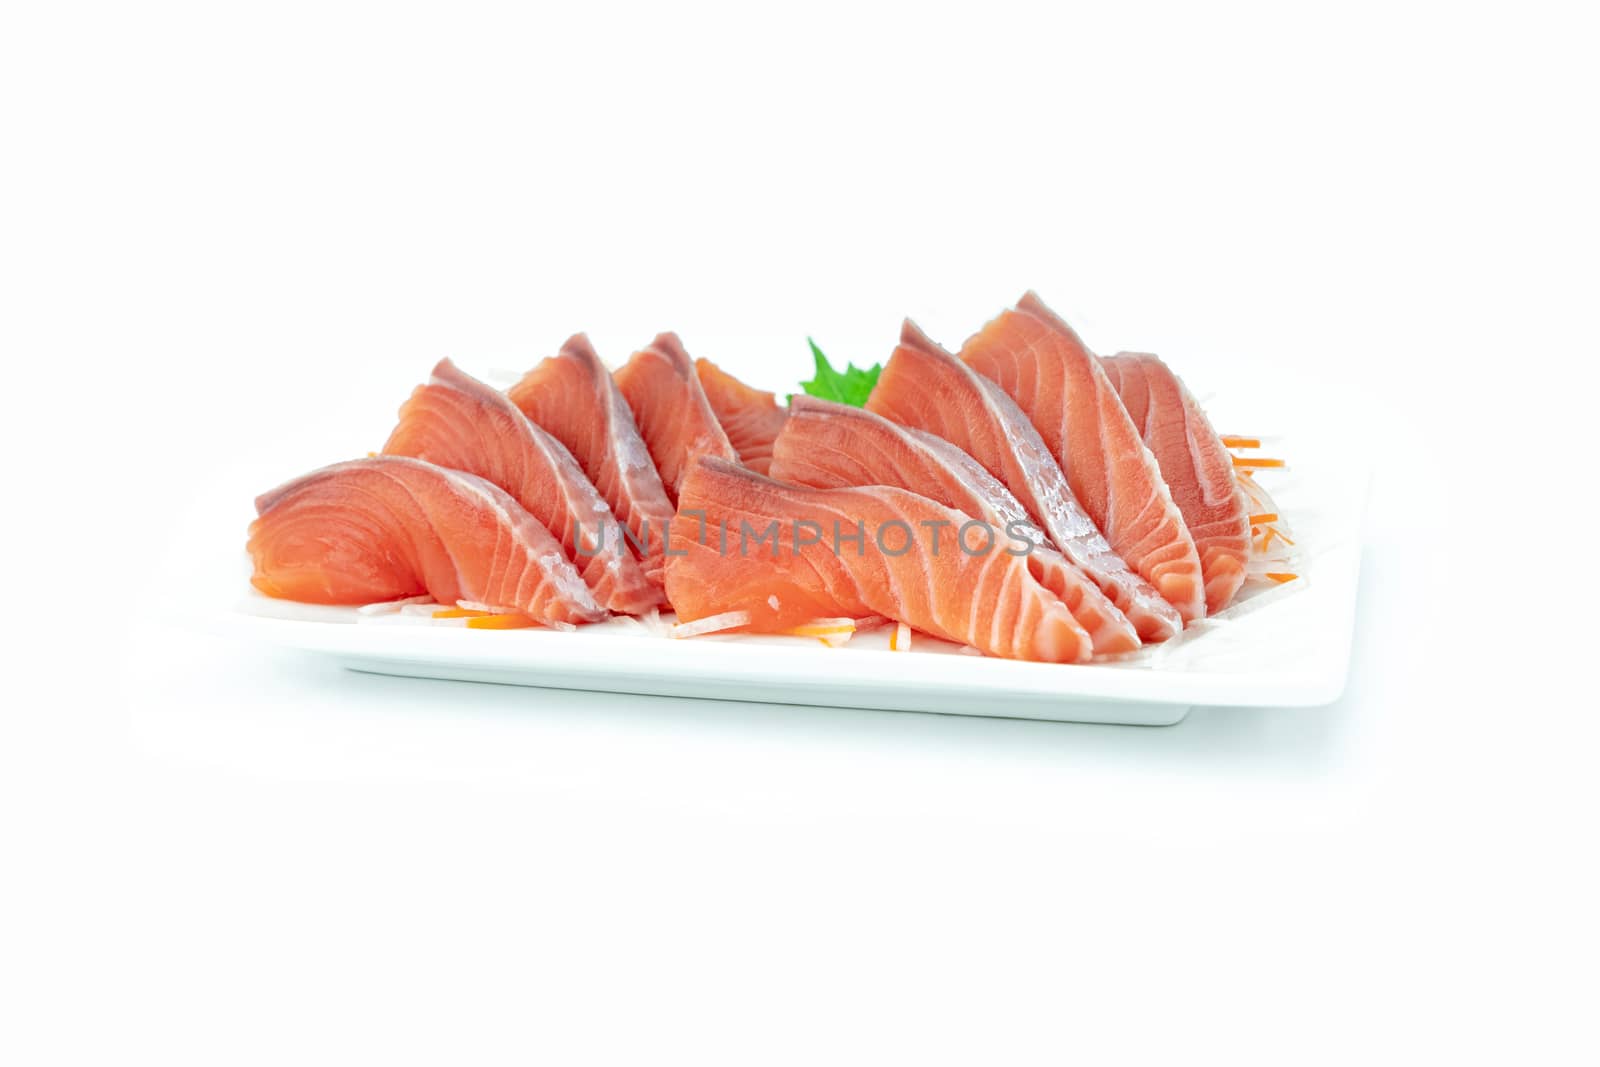 Salmon Sashimi on white background.  Japan food concept by Buttus_casso